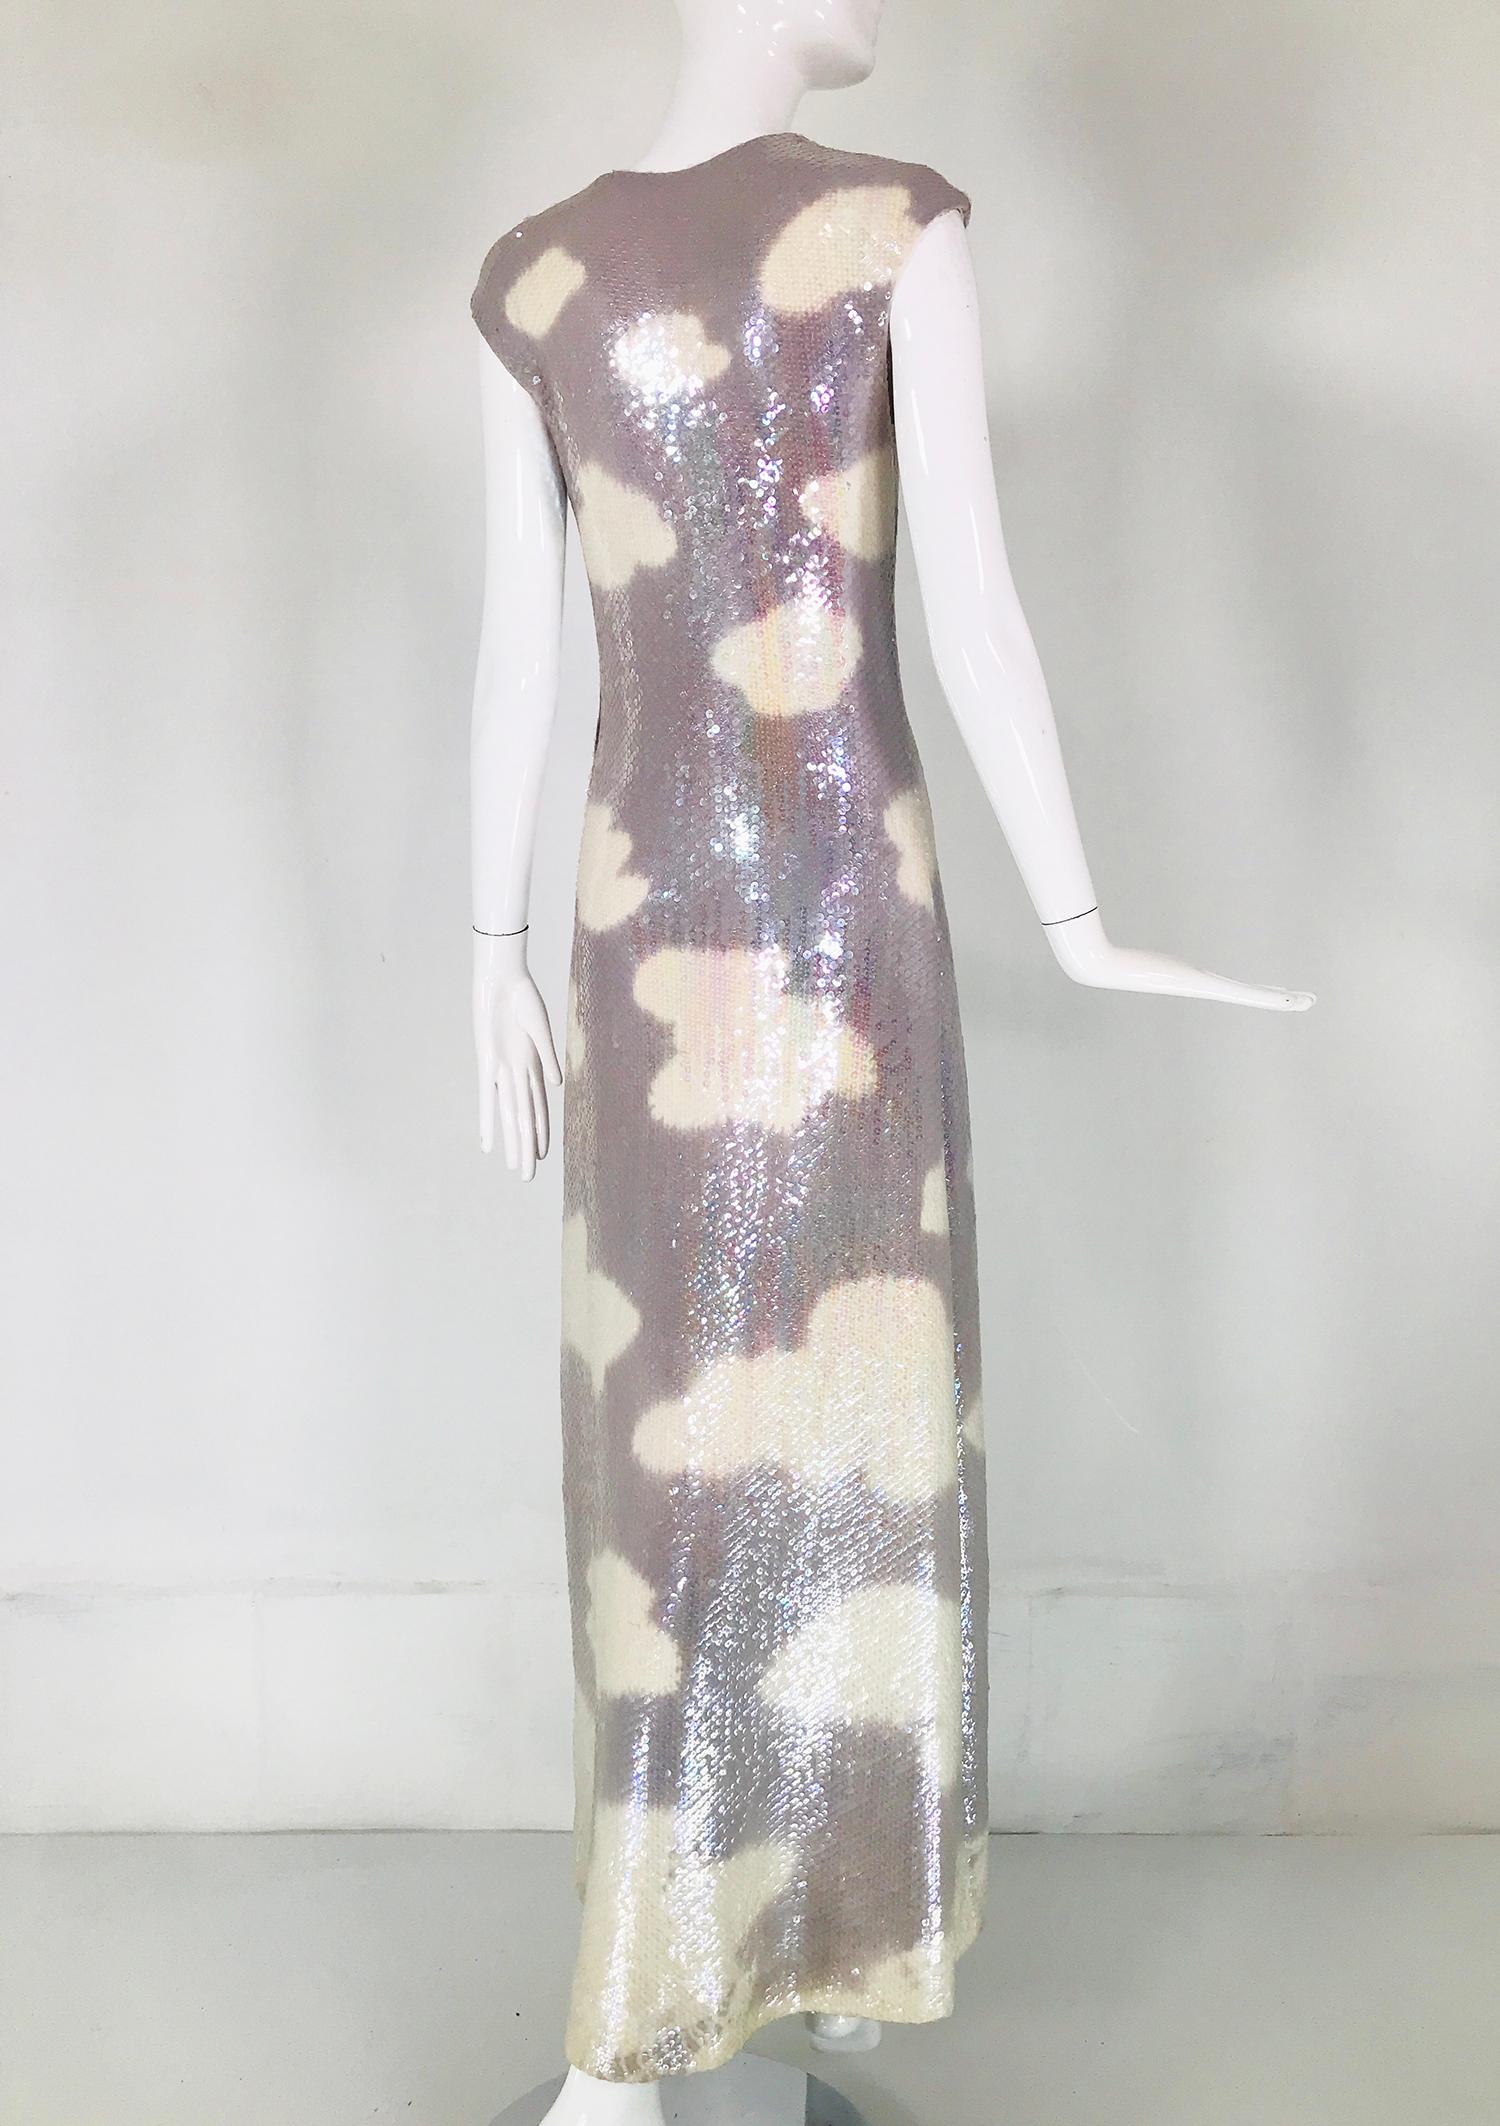 Halston Iconic Clouds Dress in Stormy Grey & Cream Iridescent Sequins Mid 1970s 2